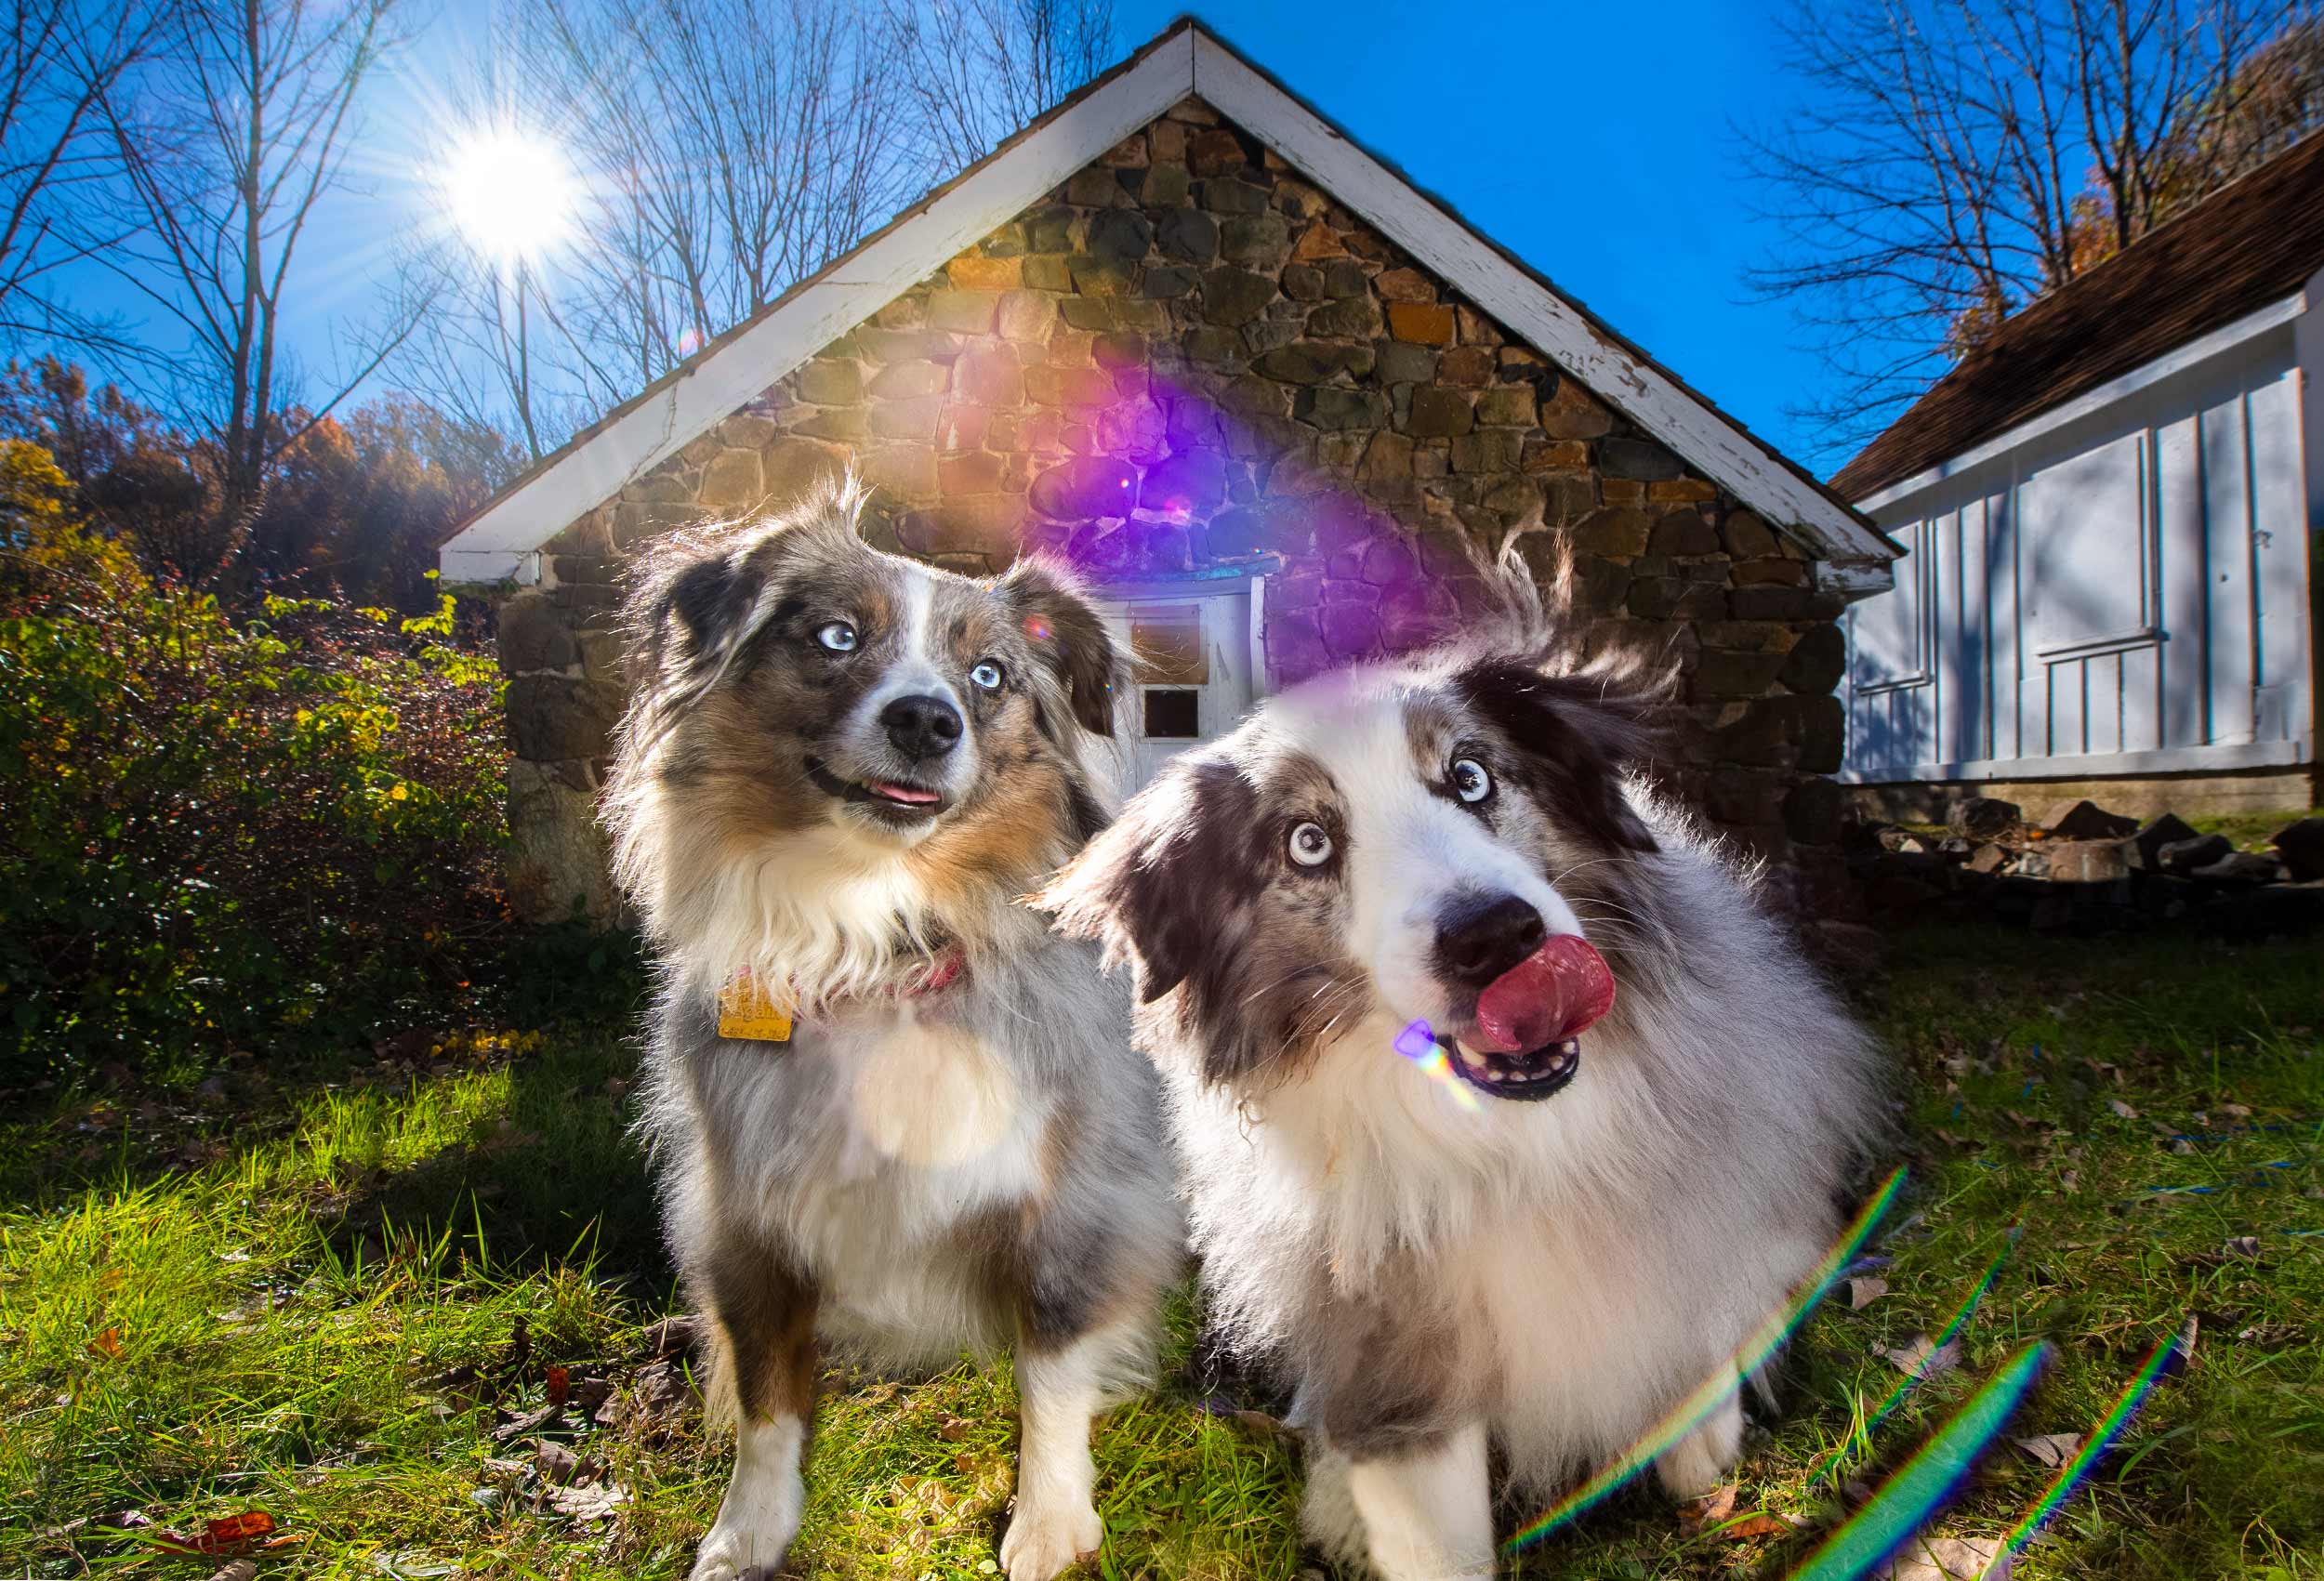 Pair of Australian Shepherds dog portrait at small stone house with sunflare